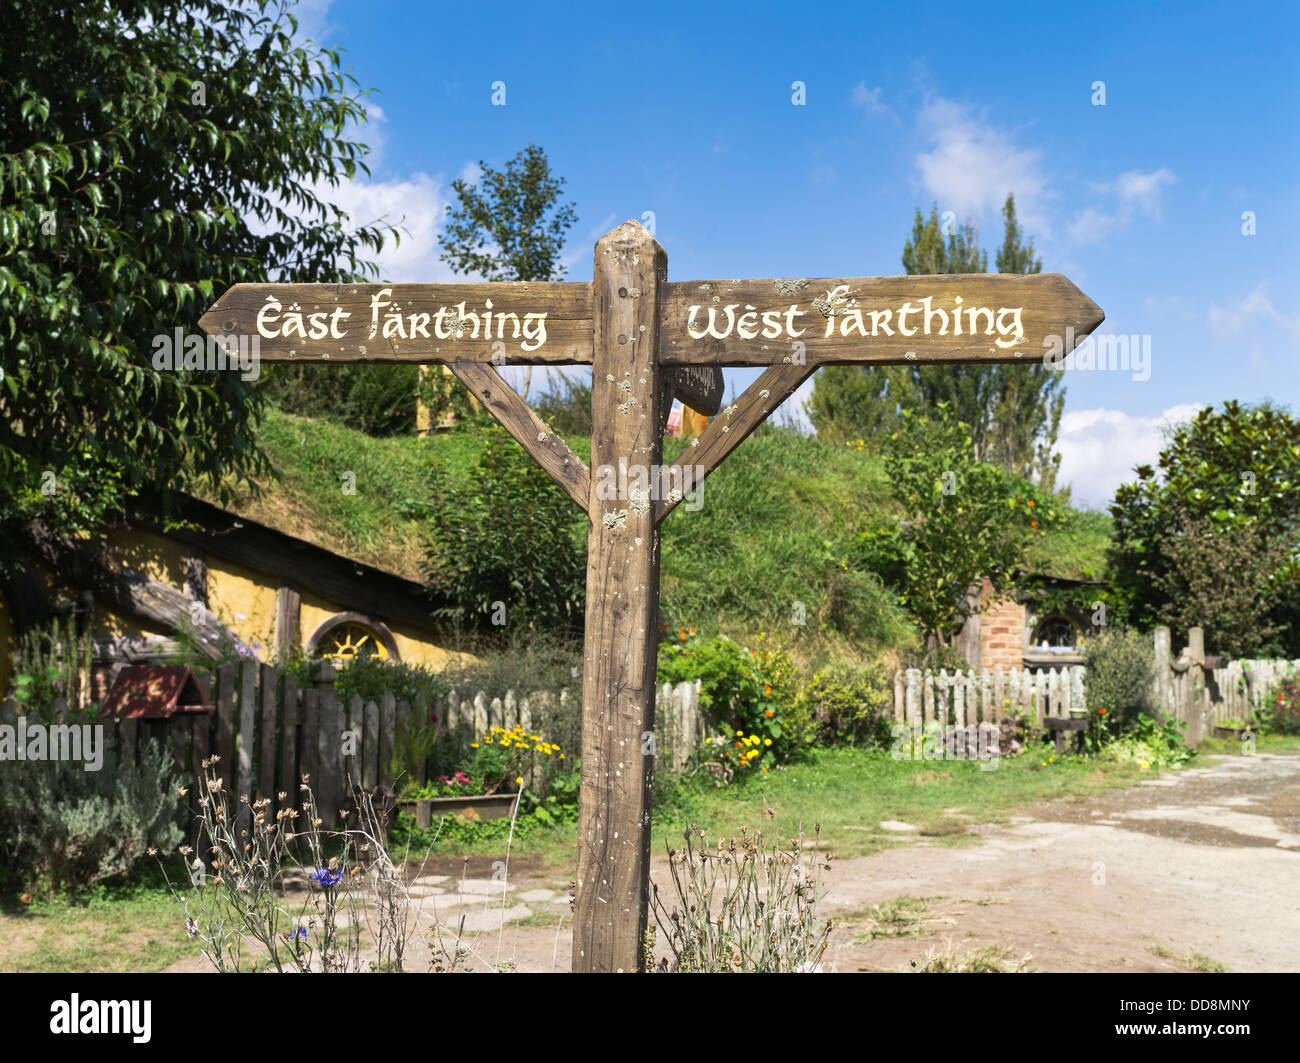 dh Lord of the Rings HOBBITON NEW ZEALAND Hobbits signpost cottage East West Farthing film set movie site hobbit location tolkien middle earth Stock Photo